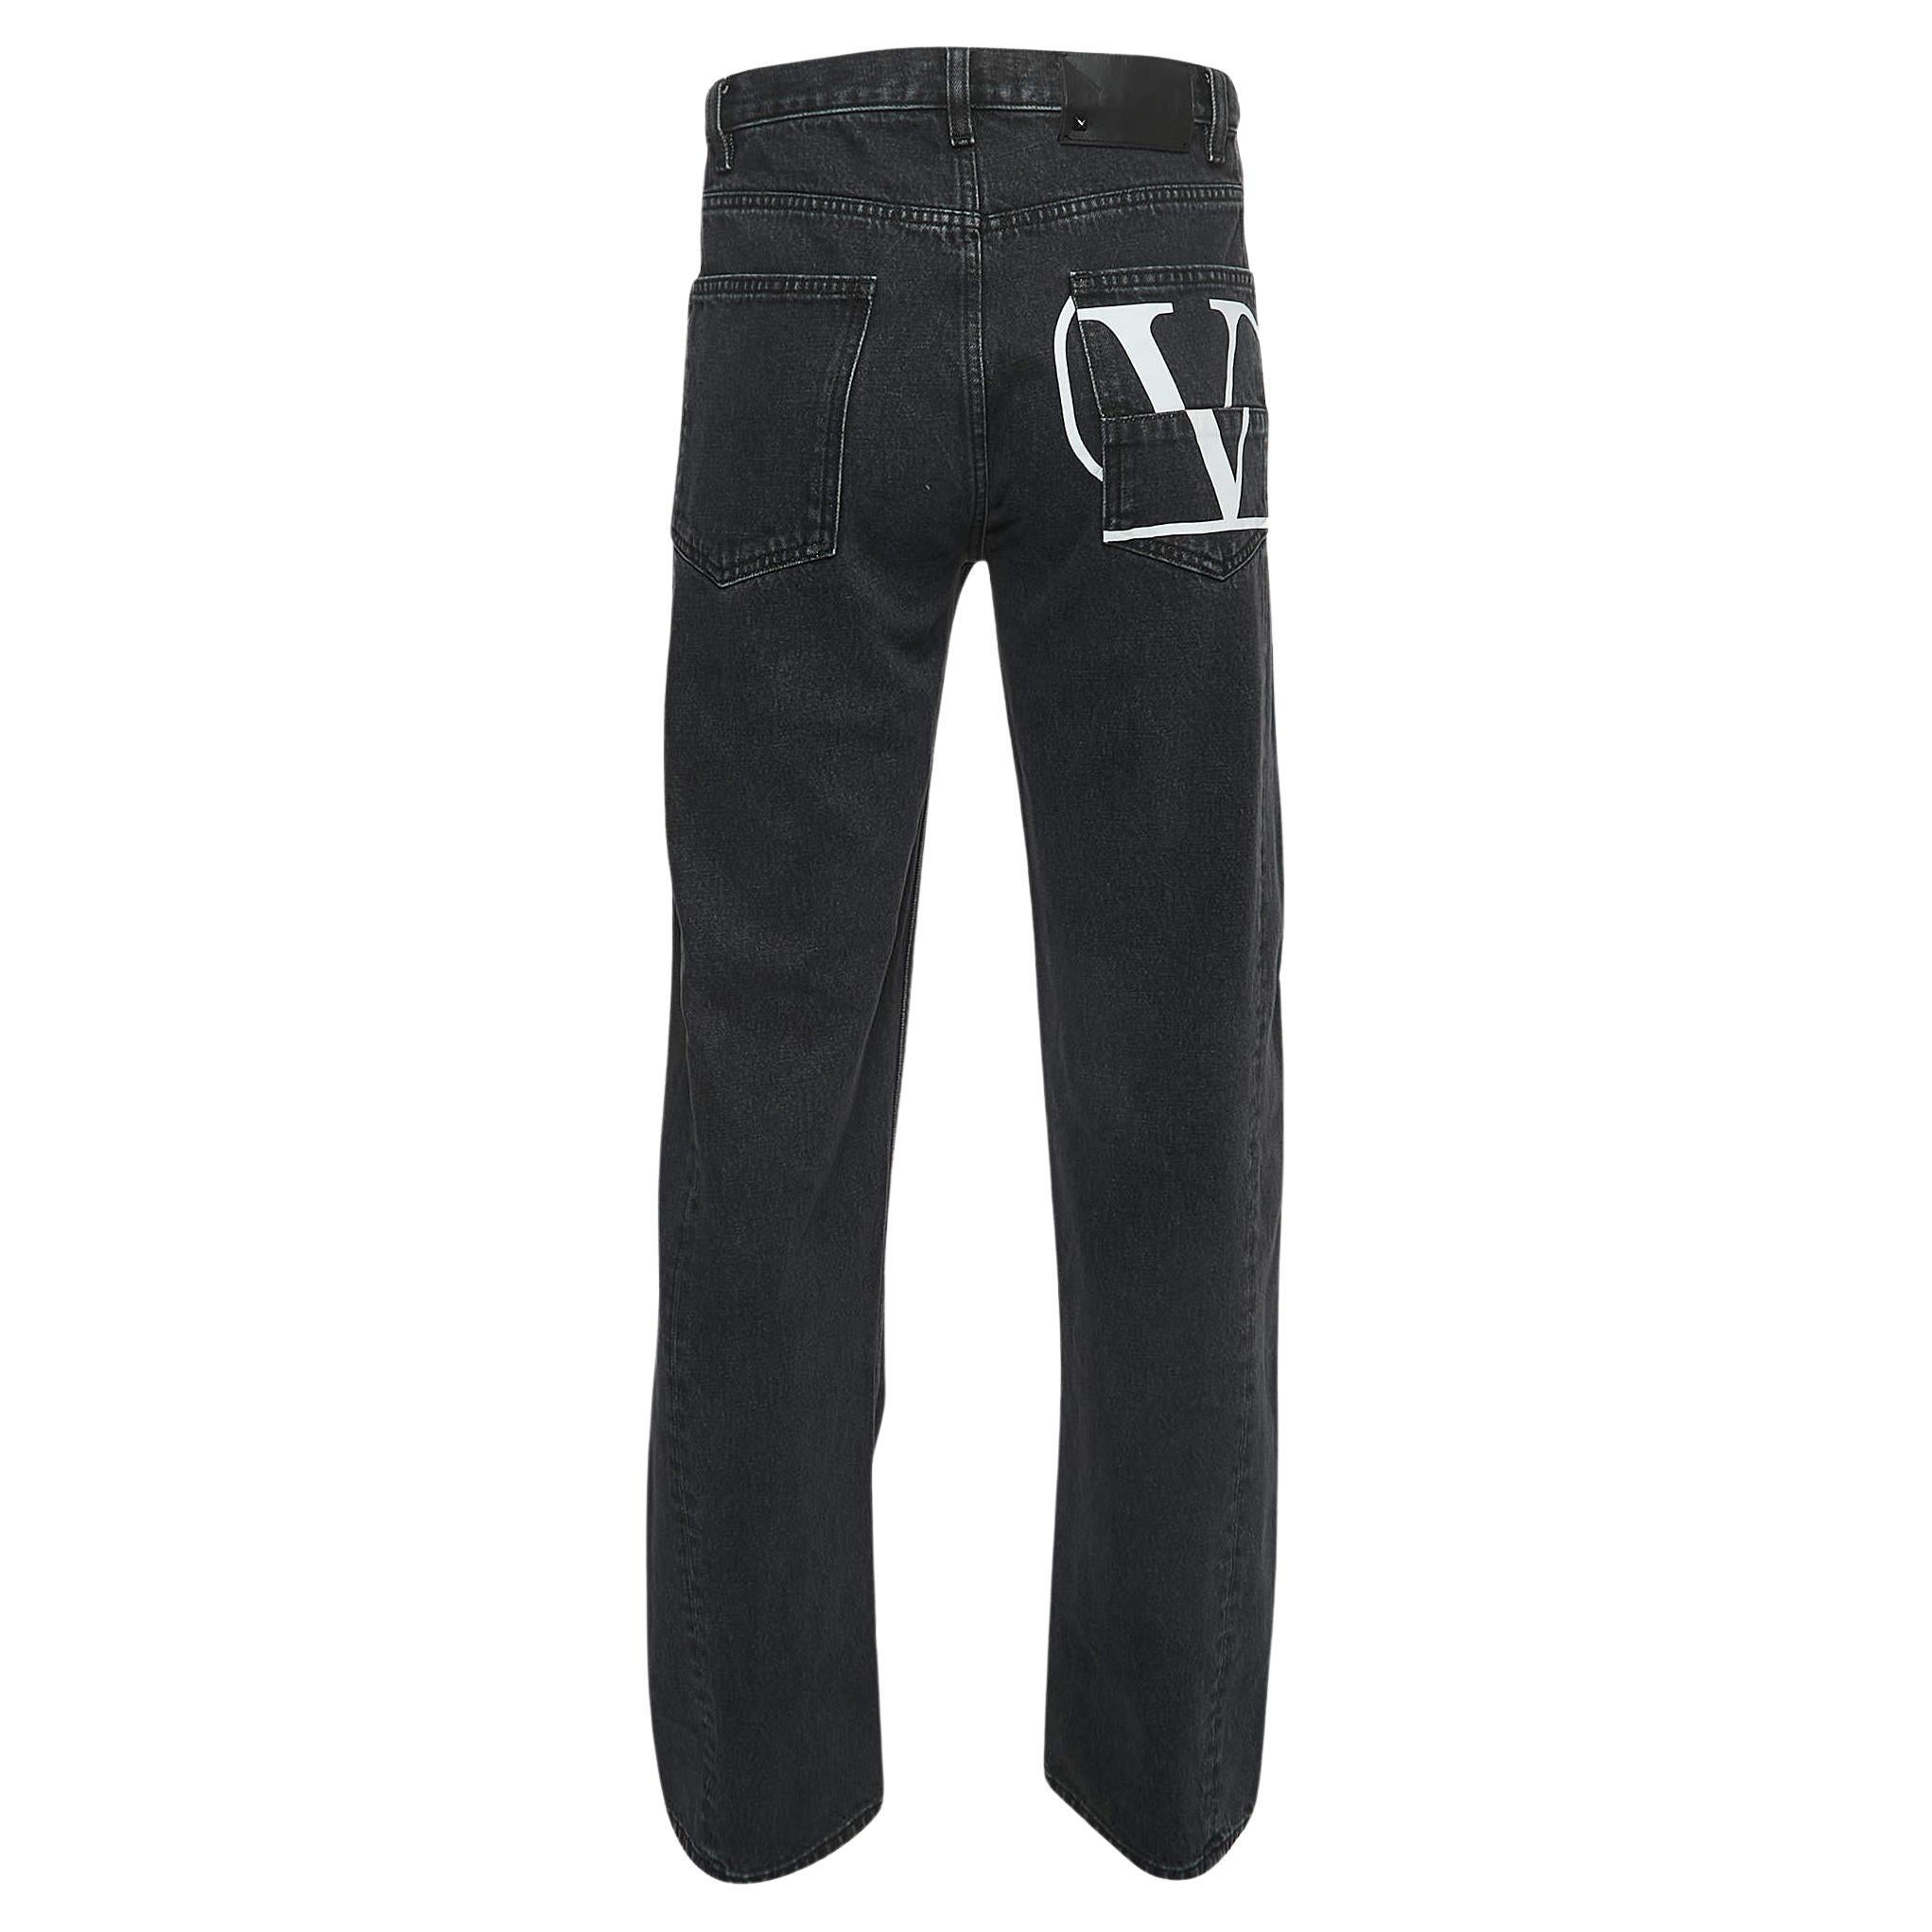 Step into style with these Valentino jeans. Crafted with precision, they offer the perfect blend of fashion and comfort, making them a must-have for any wardrobe.

